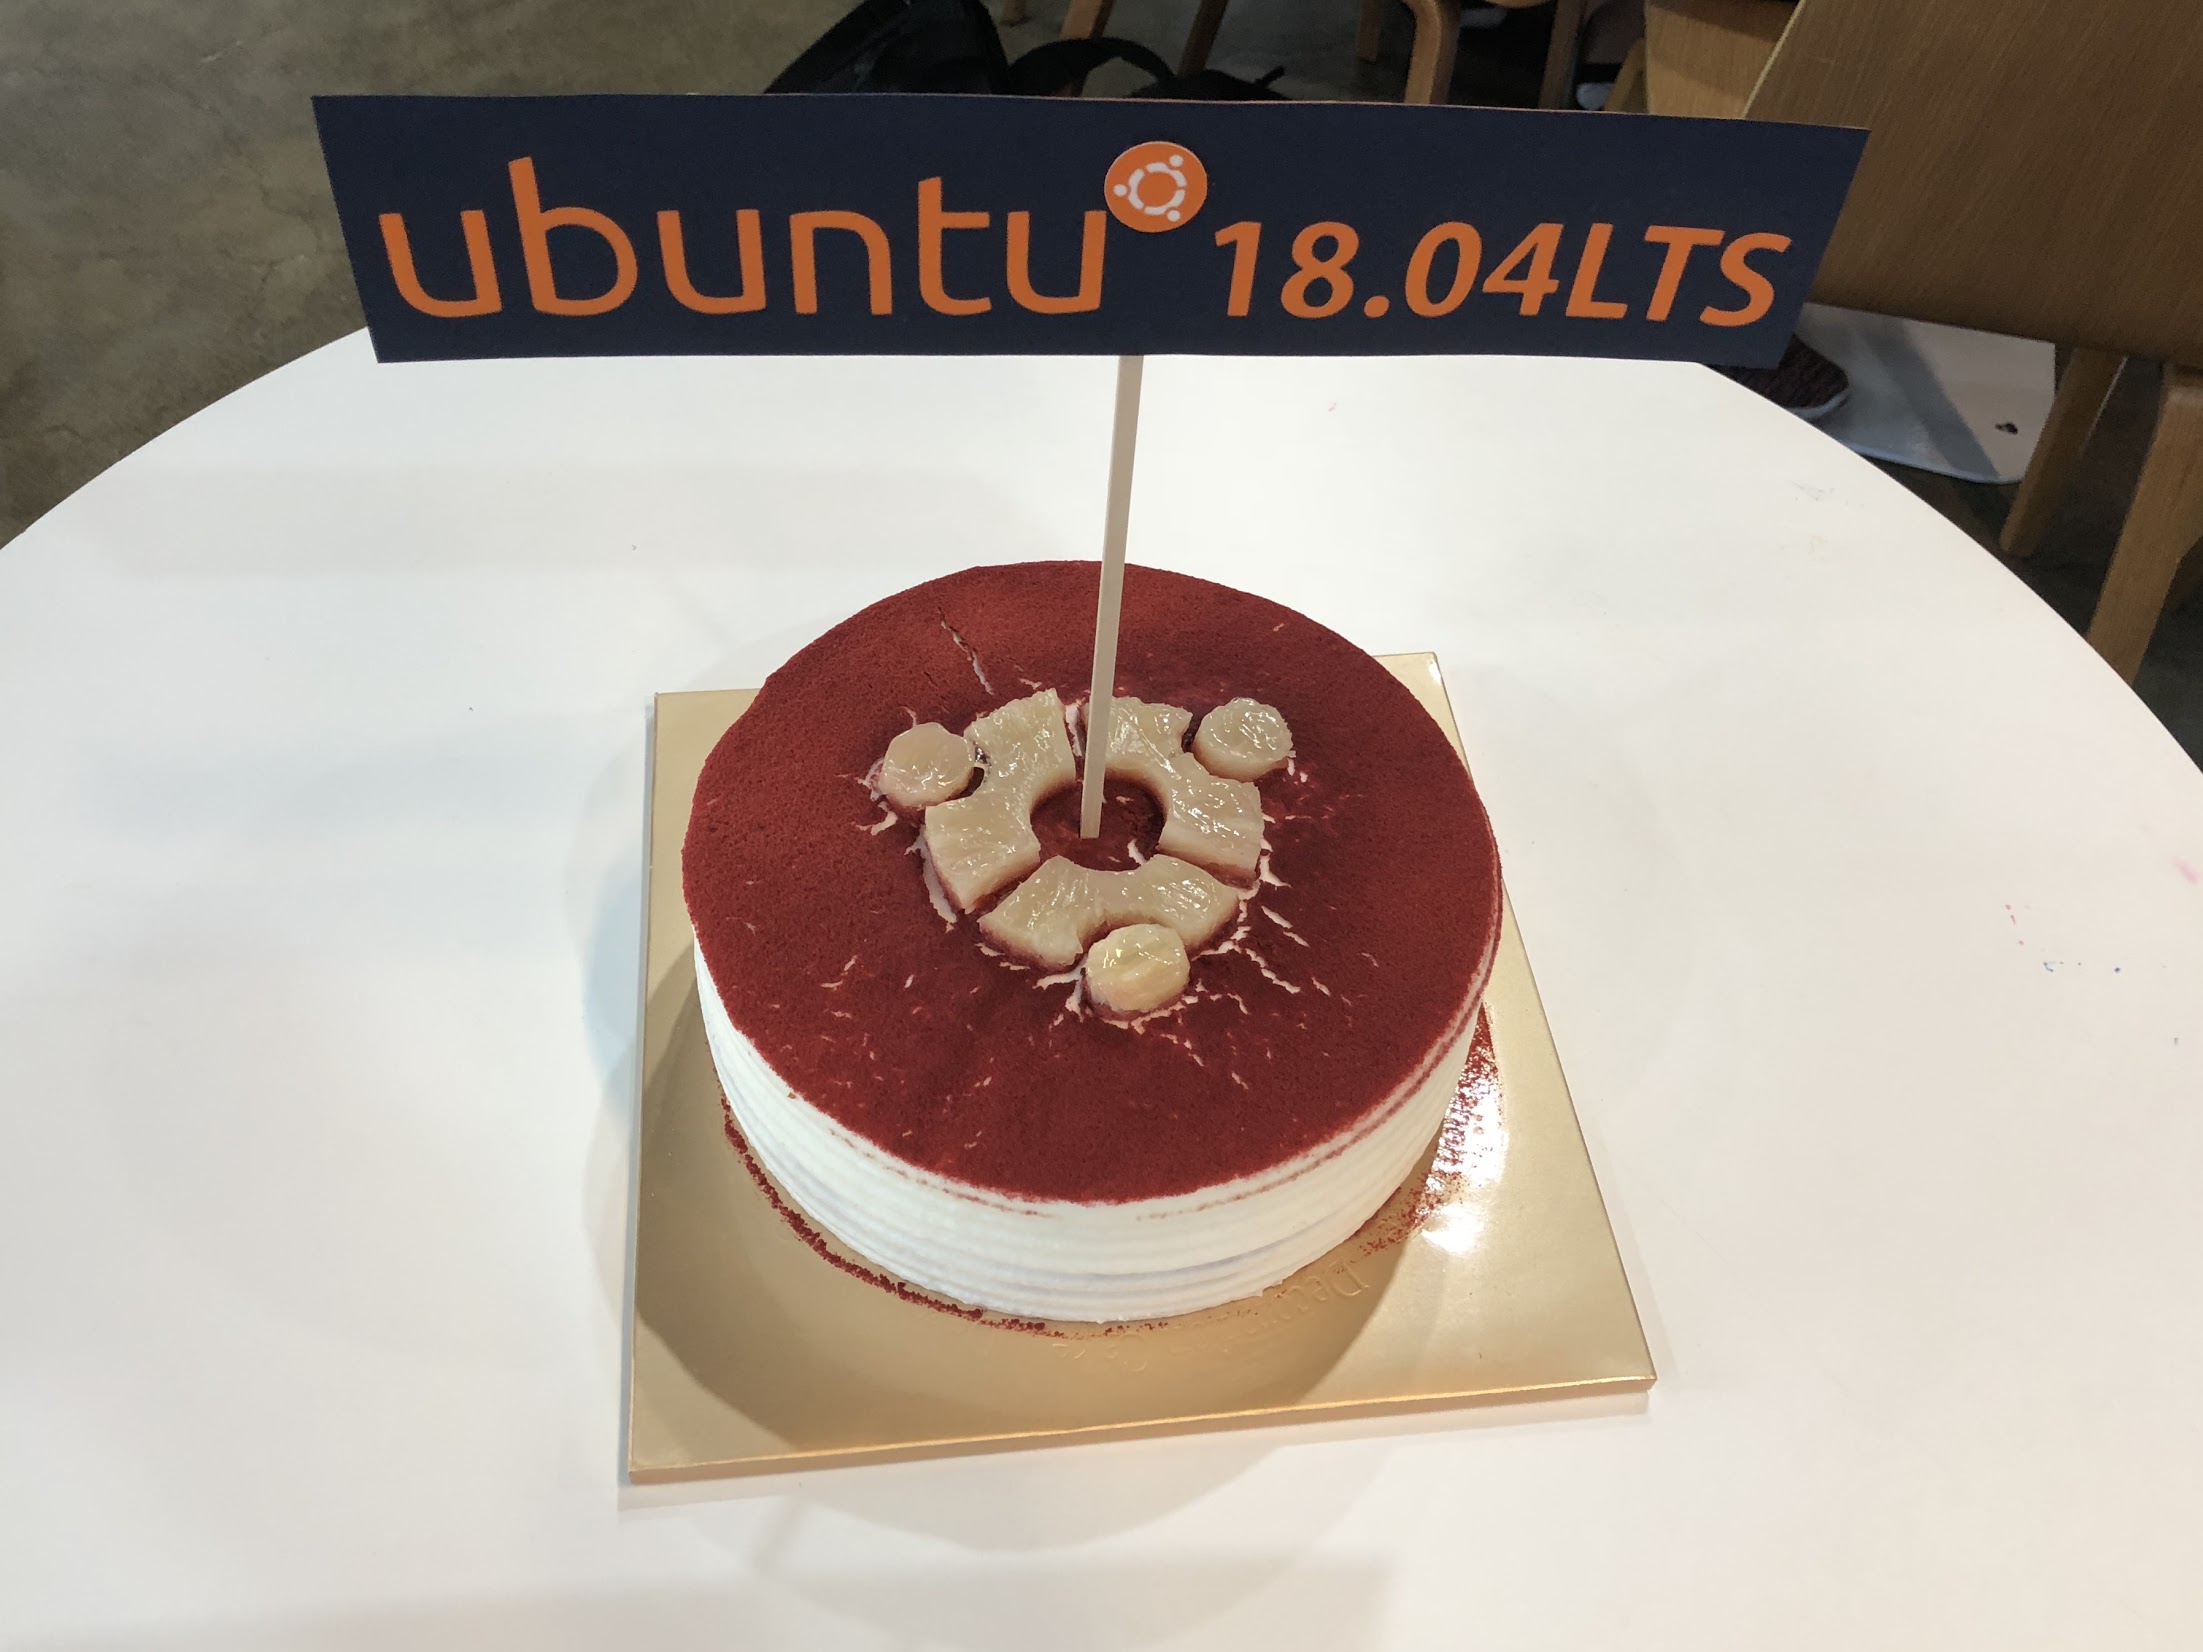 Report for hosting Ubuntu 18.04 LTS Release Party in Korea